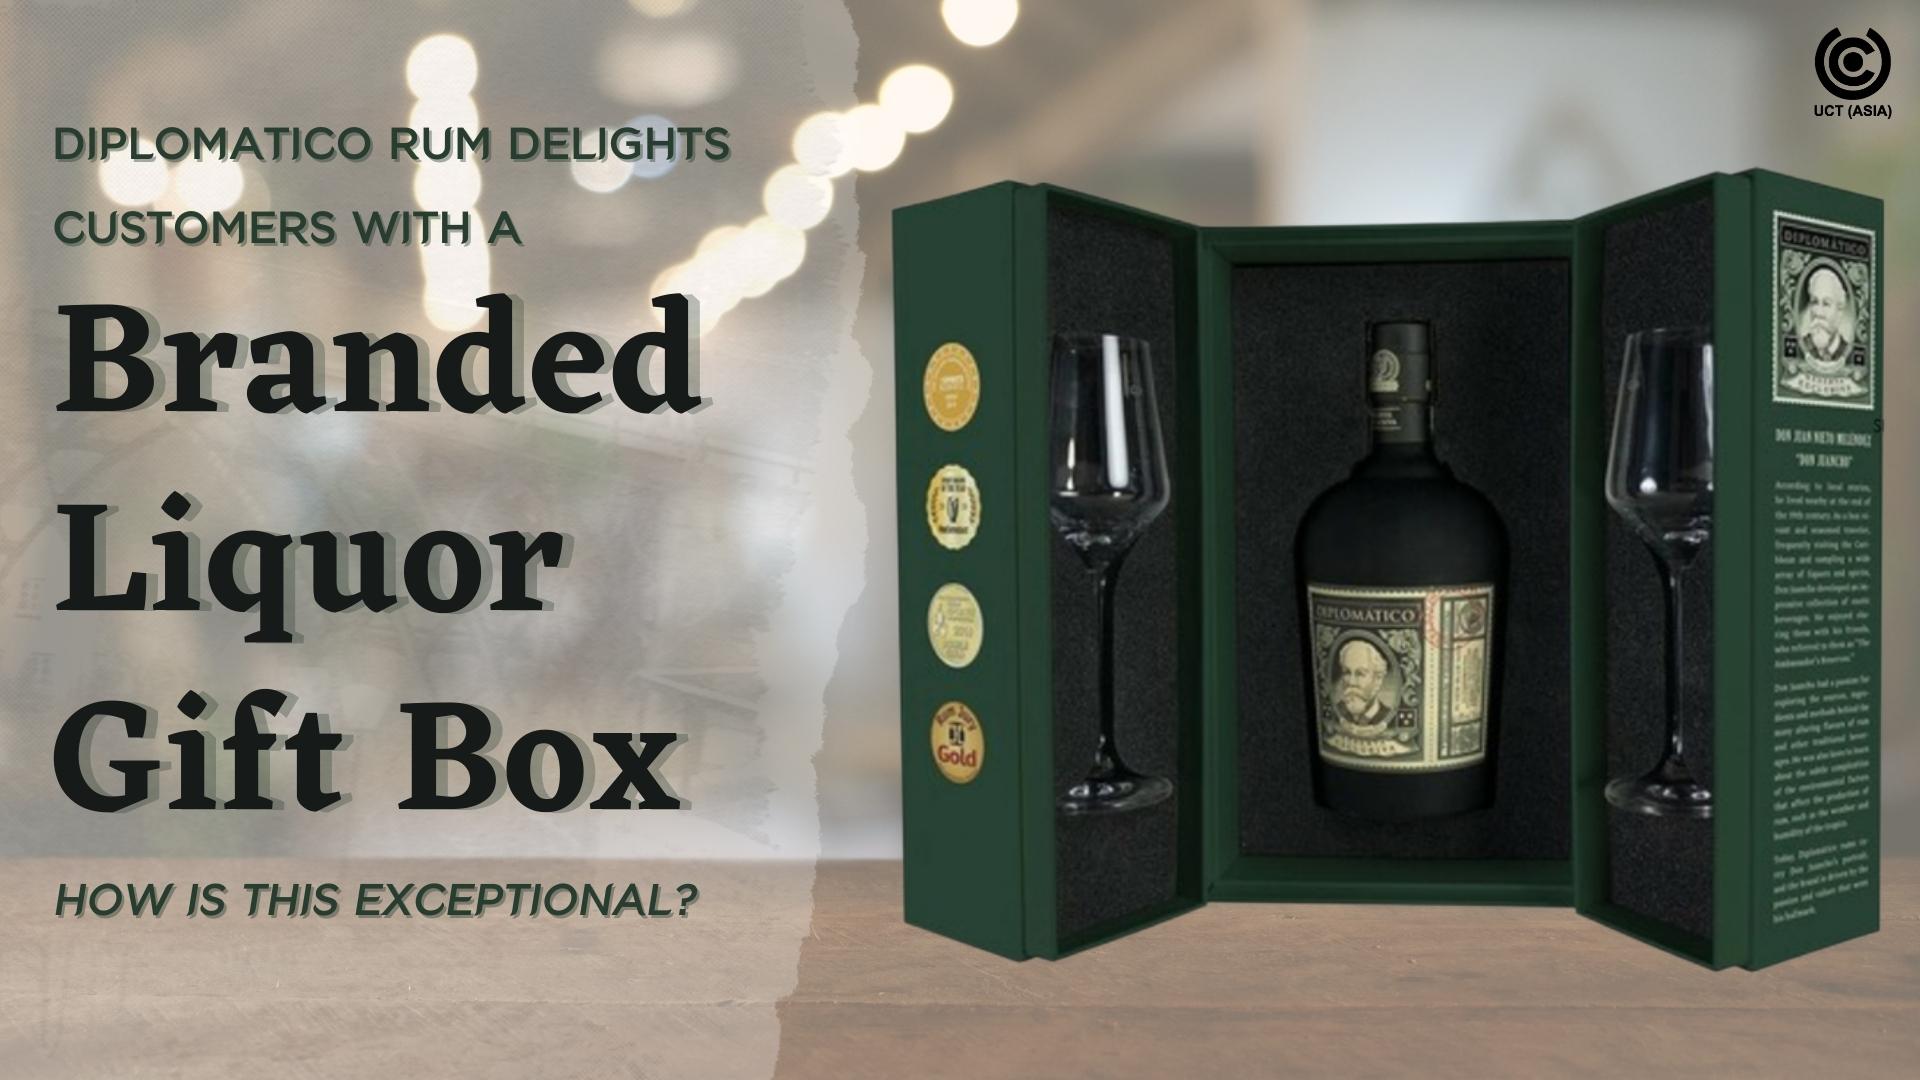 Diplomatico Rum Delights Customers With A Branded Liquor Gift Box - How Is  This Exceptional? - UCT (Asia)